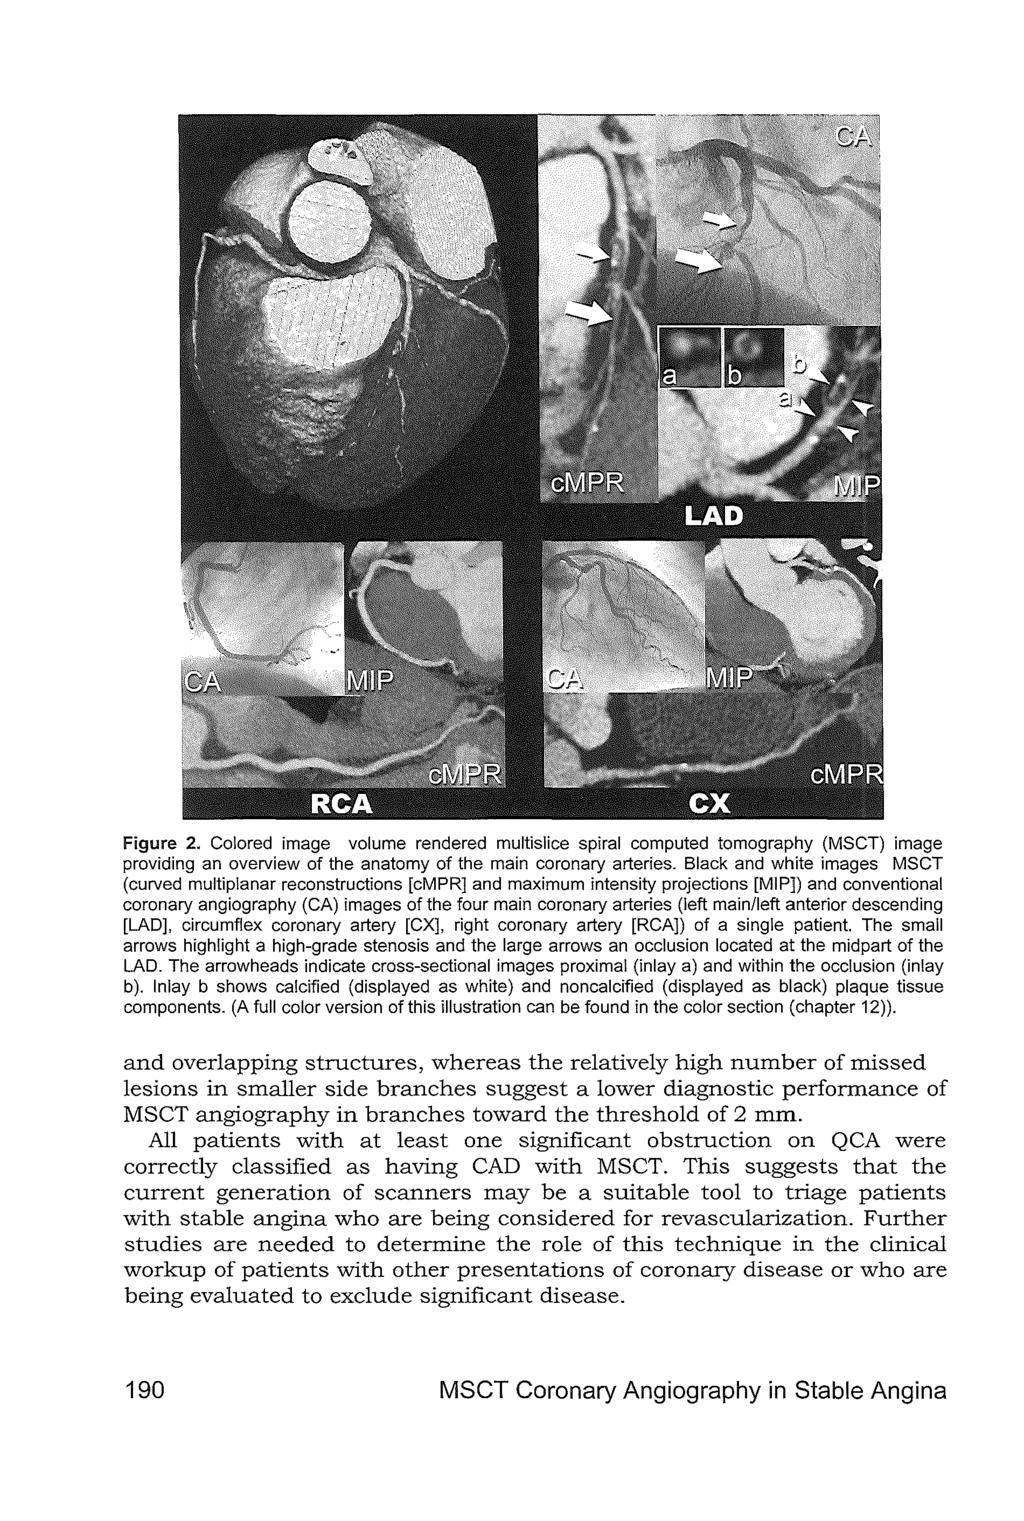 Figure 2. Colored image volume rendered multislice spiral computed tomography (MSCT) image providing an overview of the anatomy of the main coronary arteries.